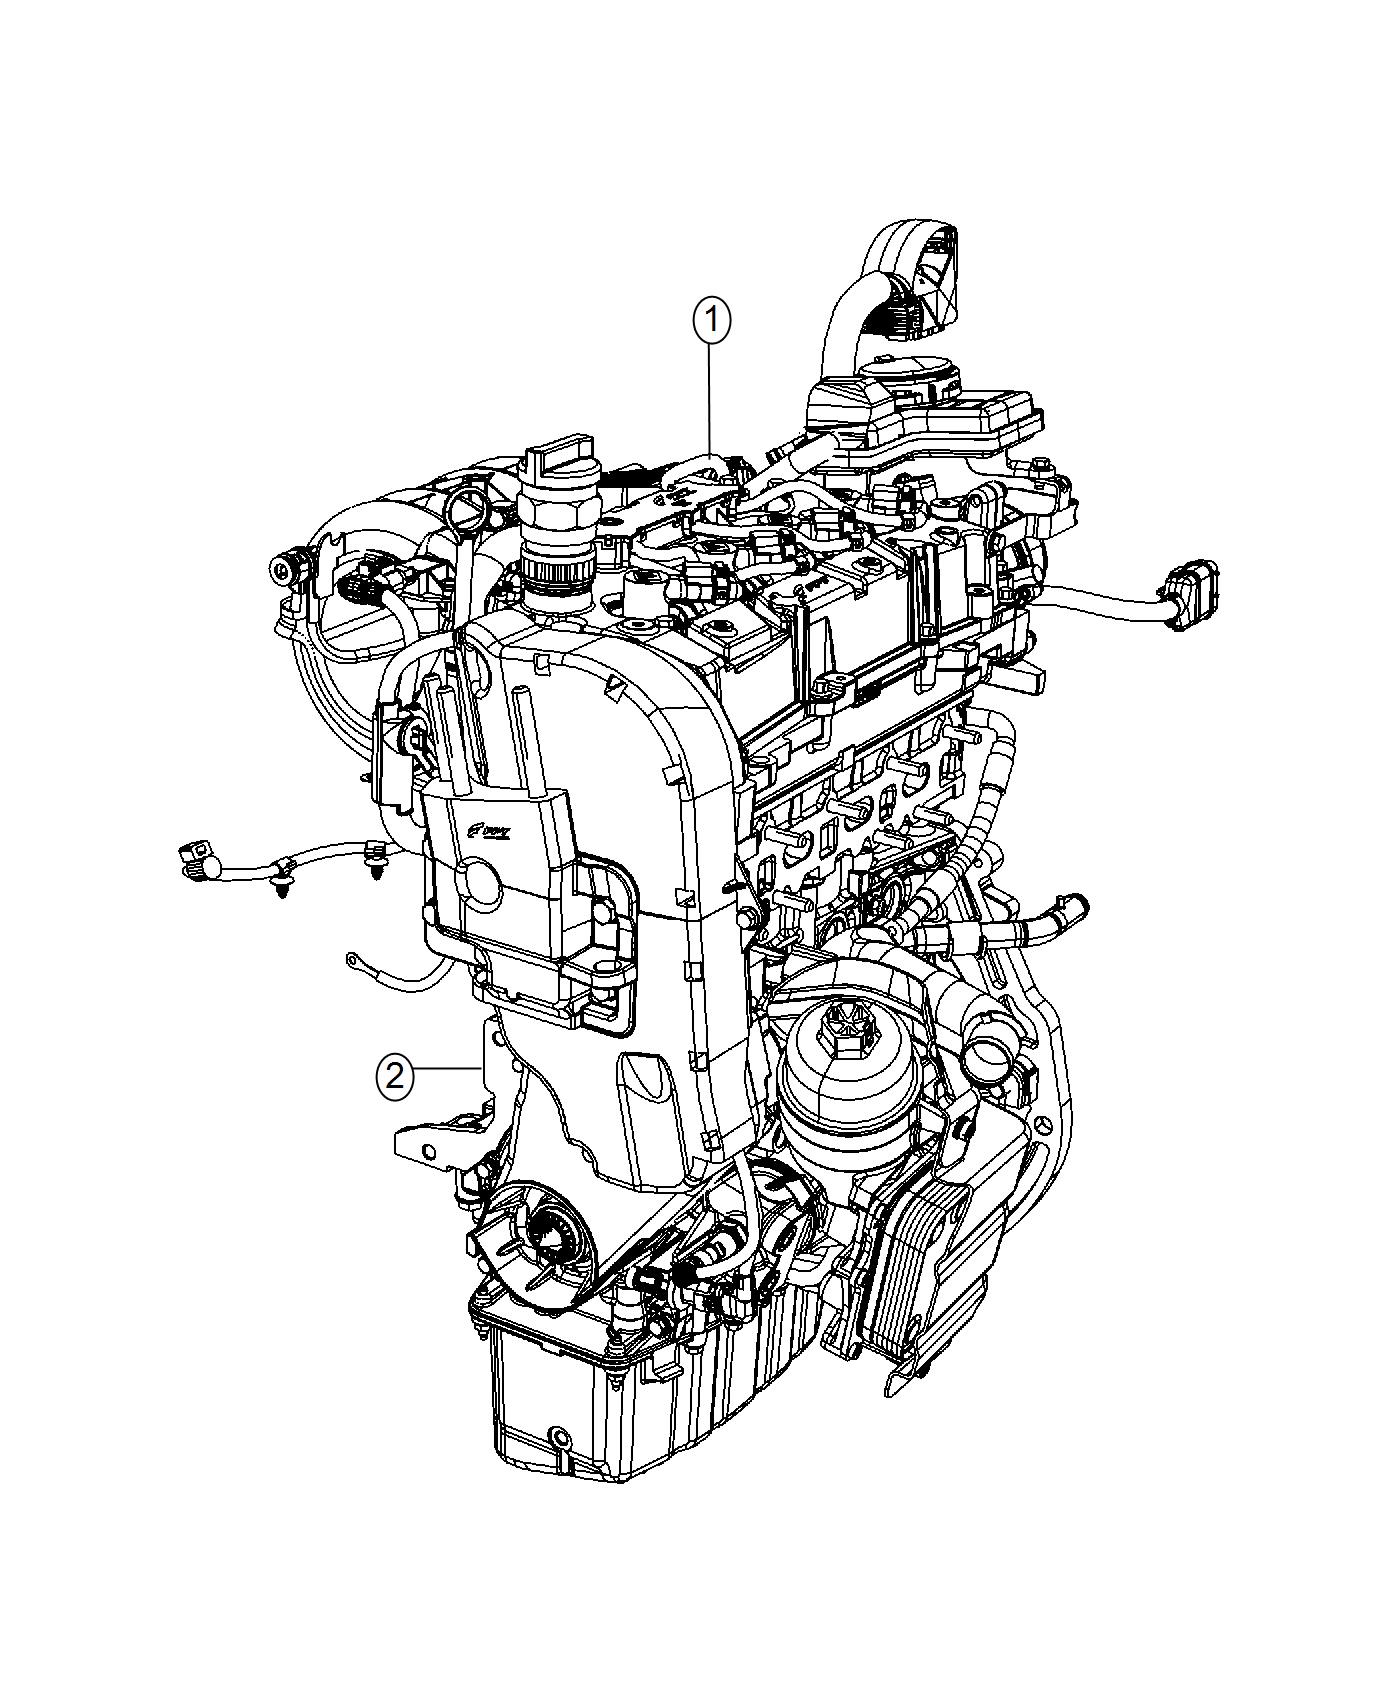 Engine Assembly And Service Long Block 1.4L Turbocharged [1.4L I4 MultiAir Turbo Engine]. Diagram